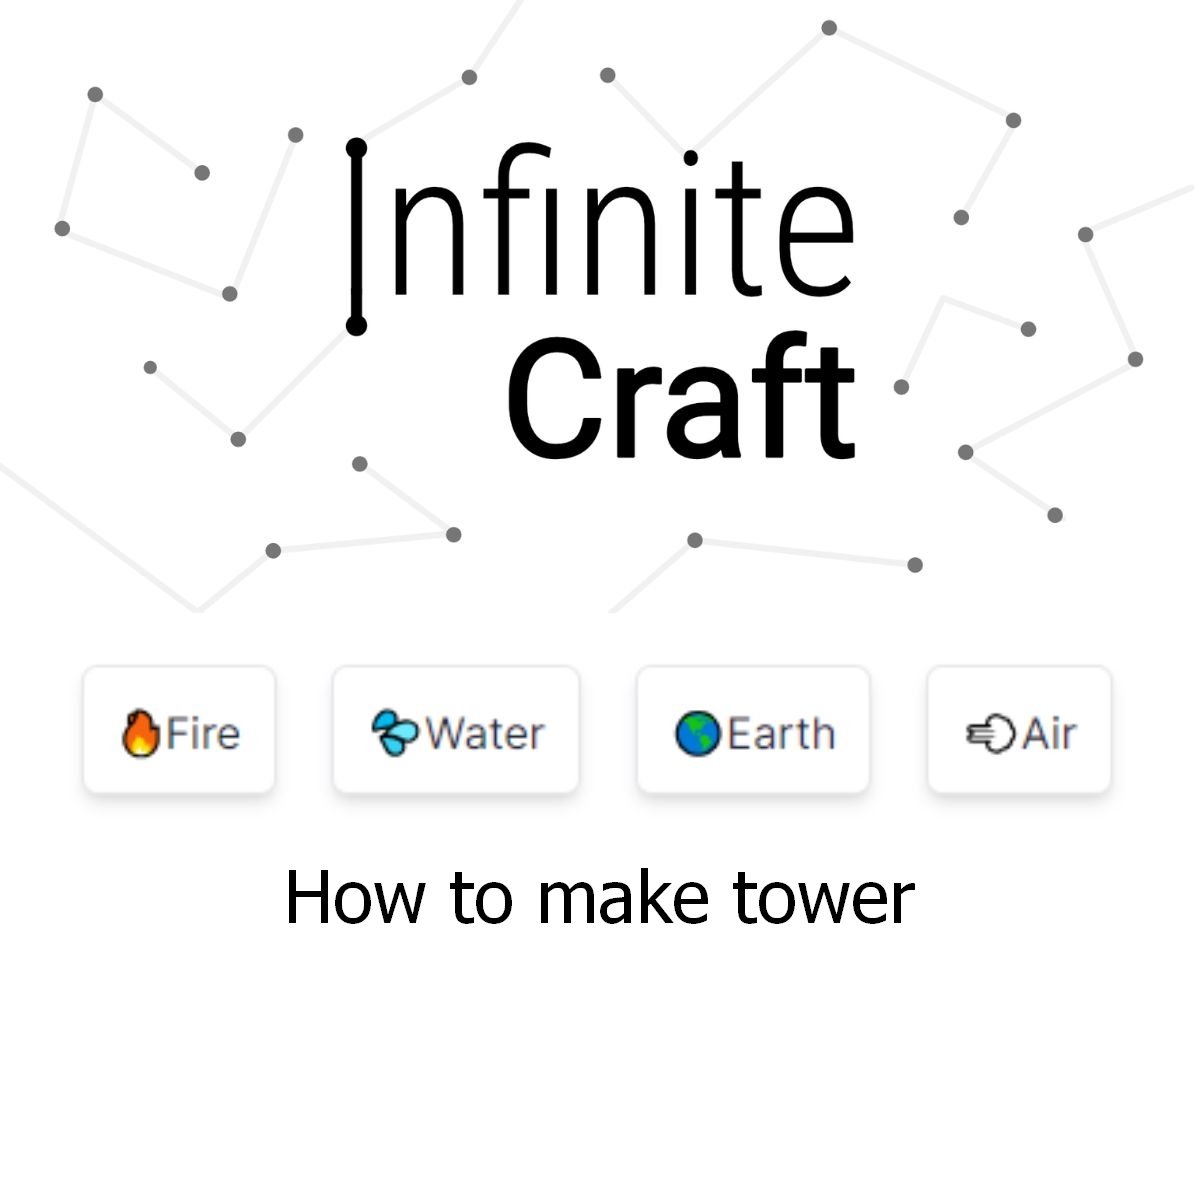 how to make tower in infinite craft